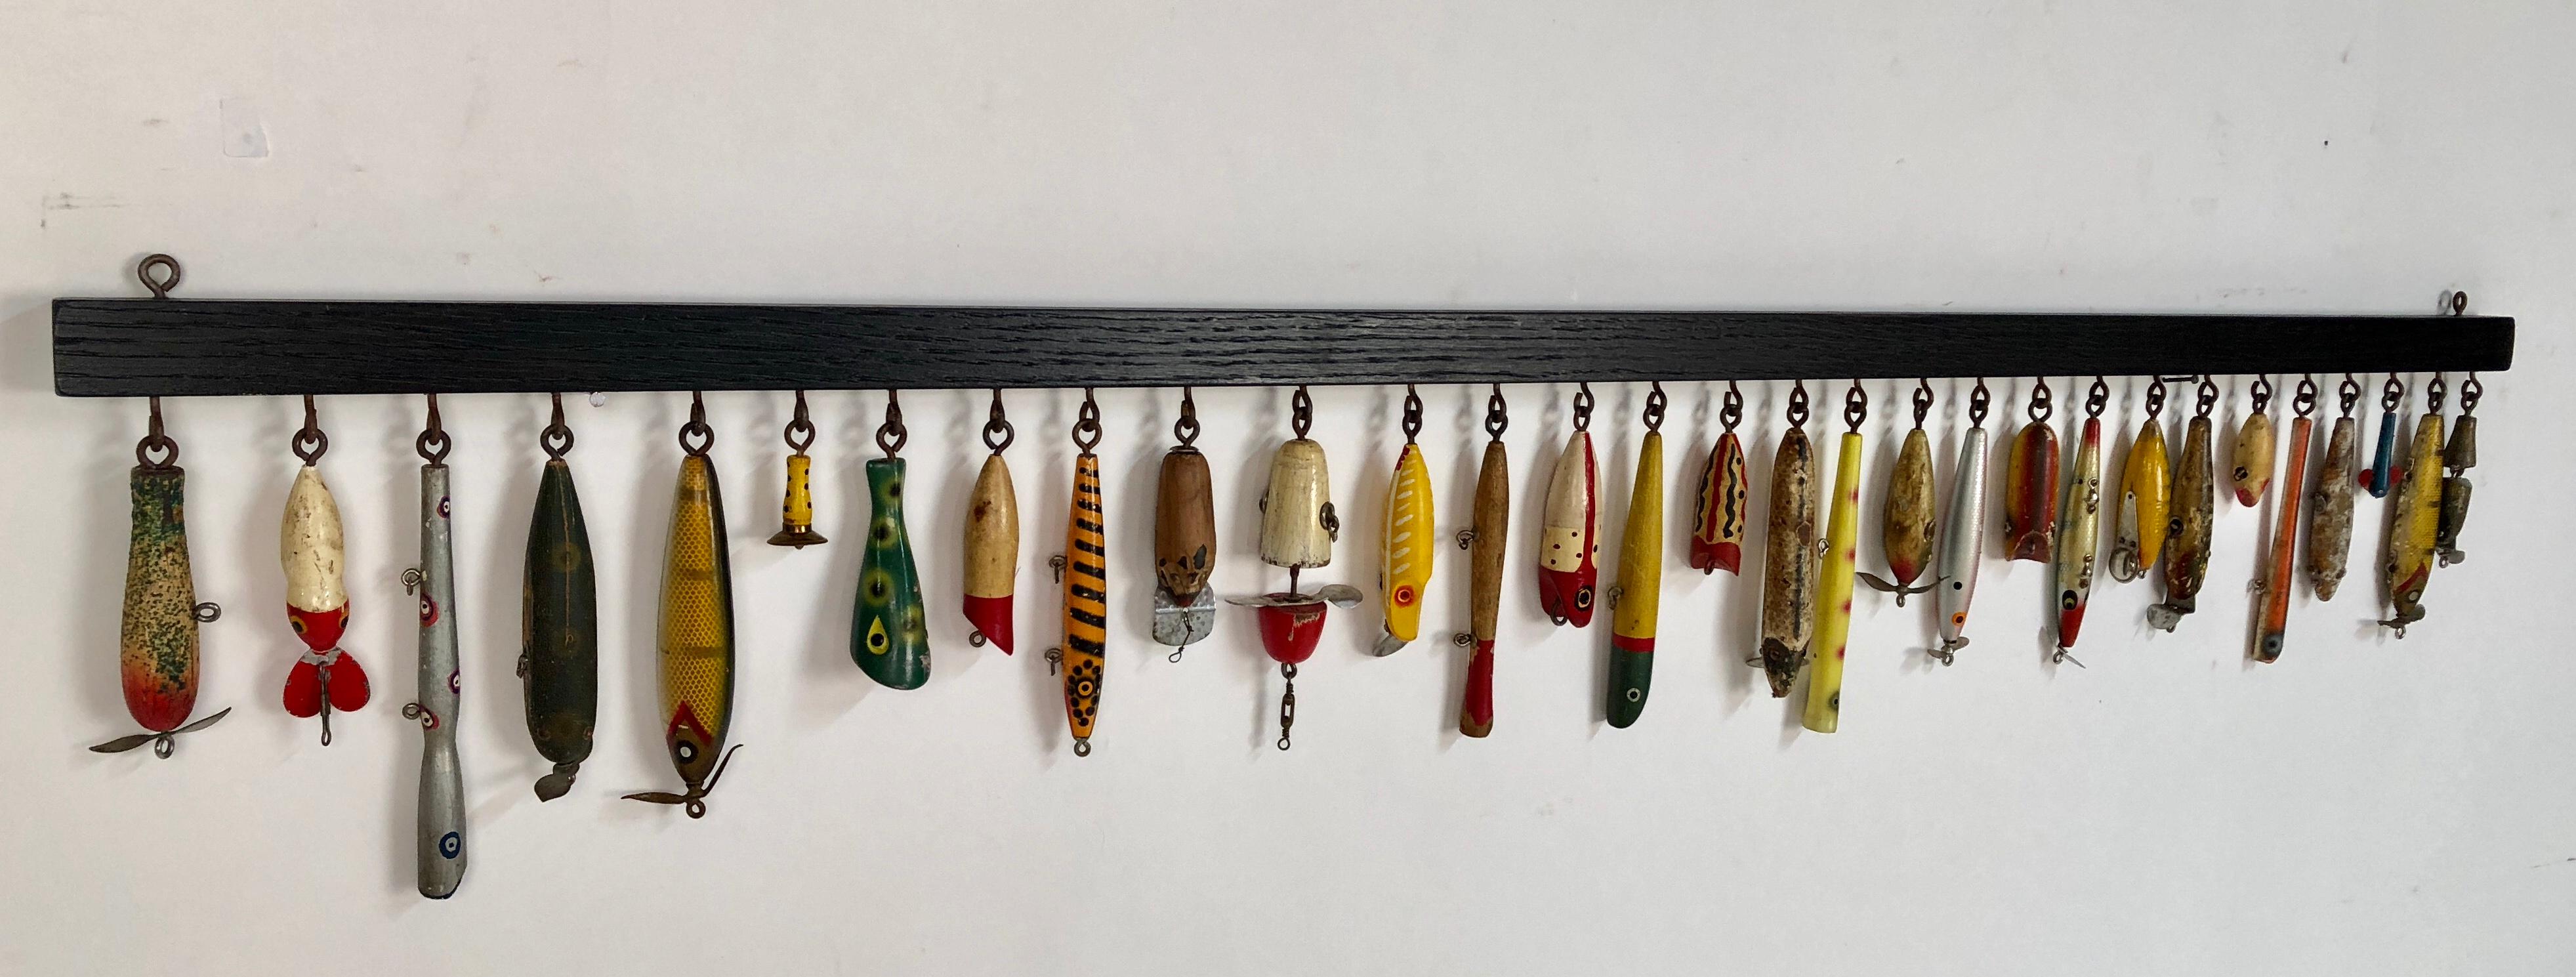 how to display old fishing lures